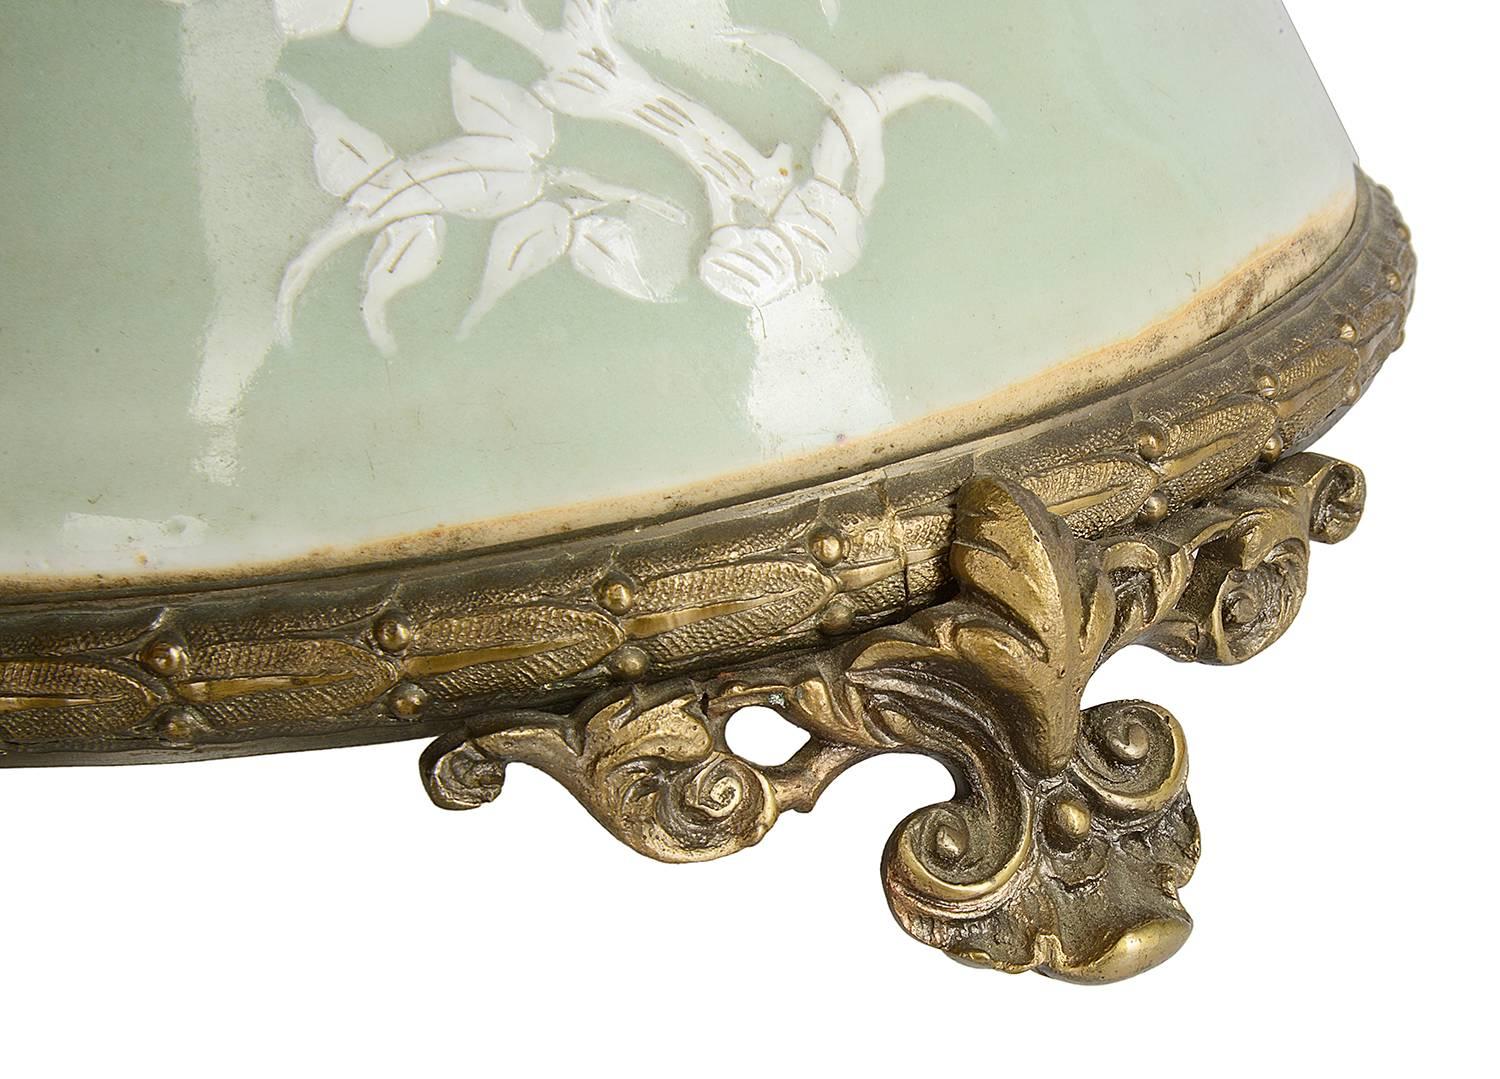 Hand-Painted 19th Century Chinese Celadon Lave or Lamp For Sale